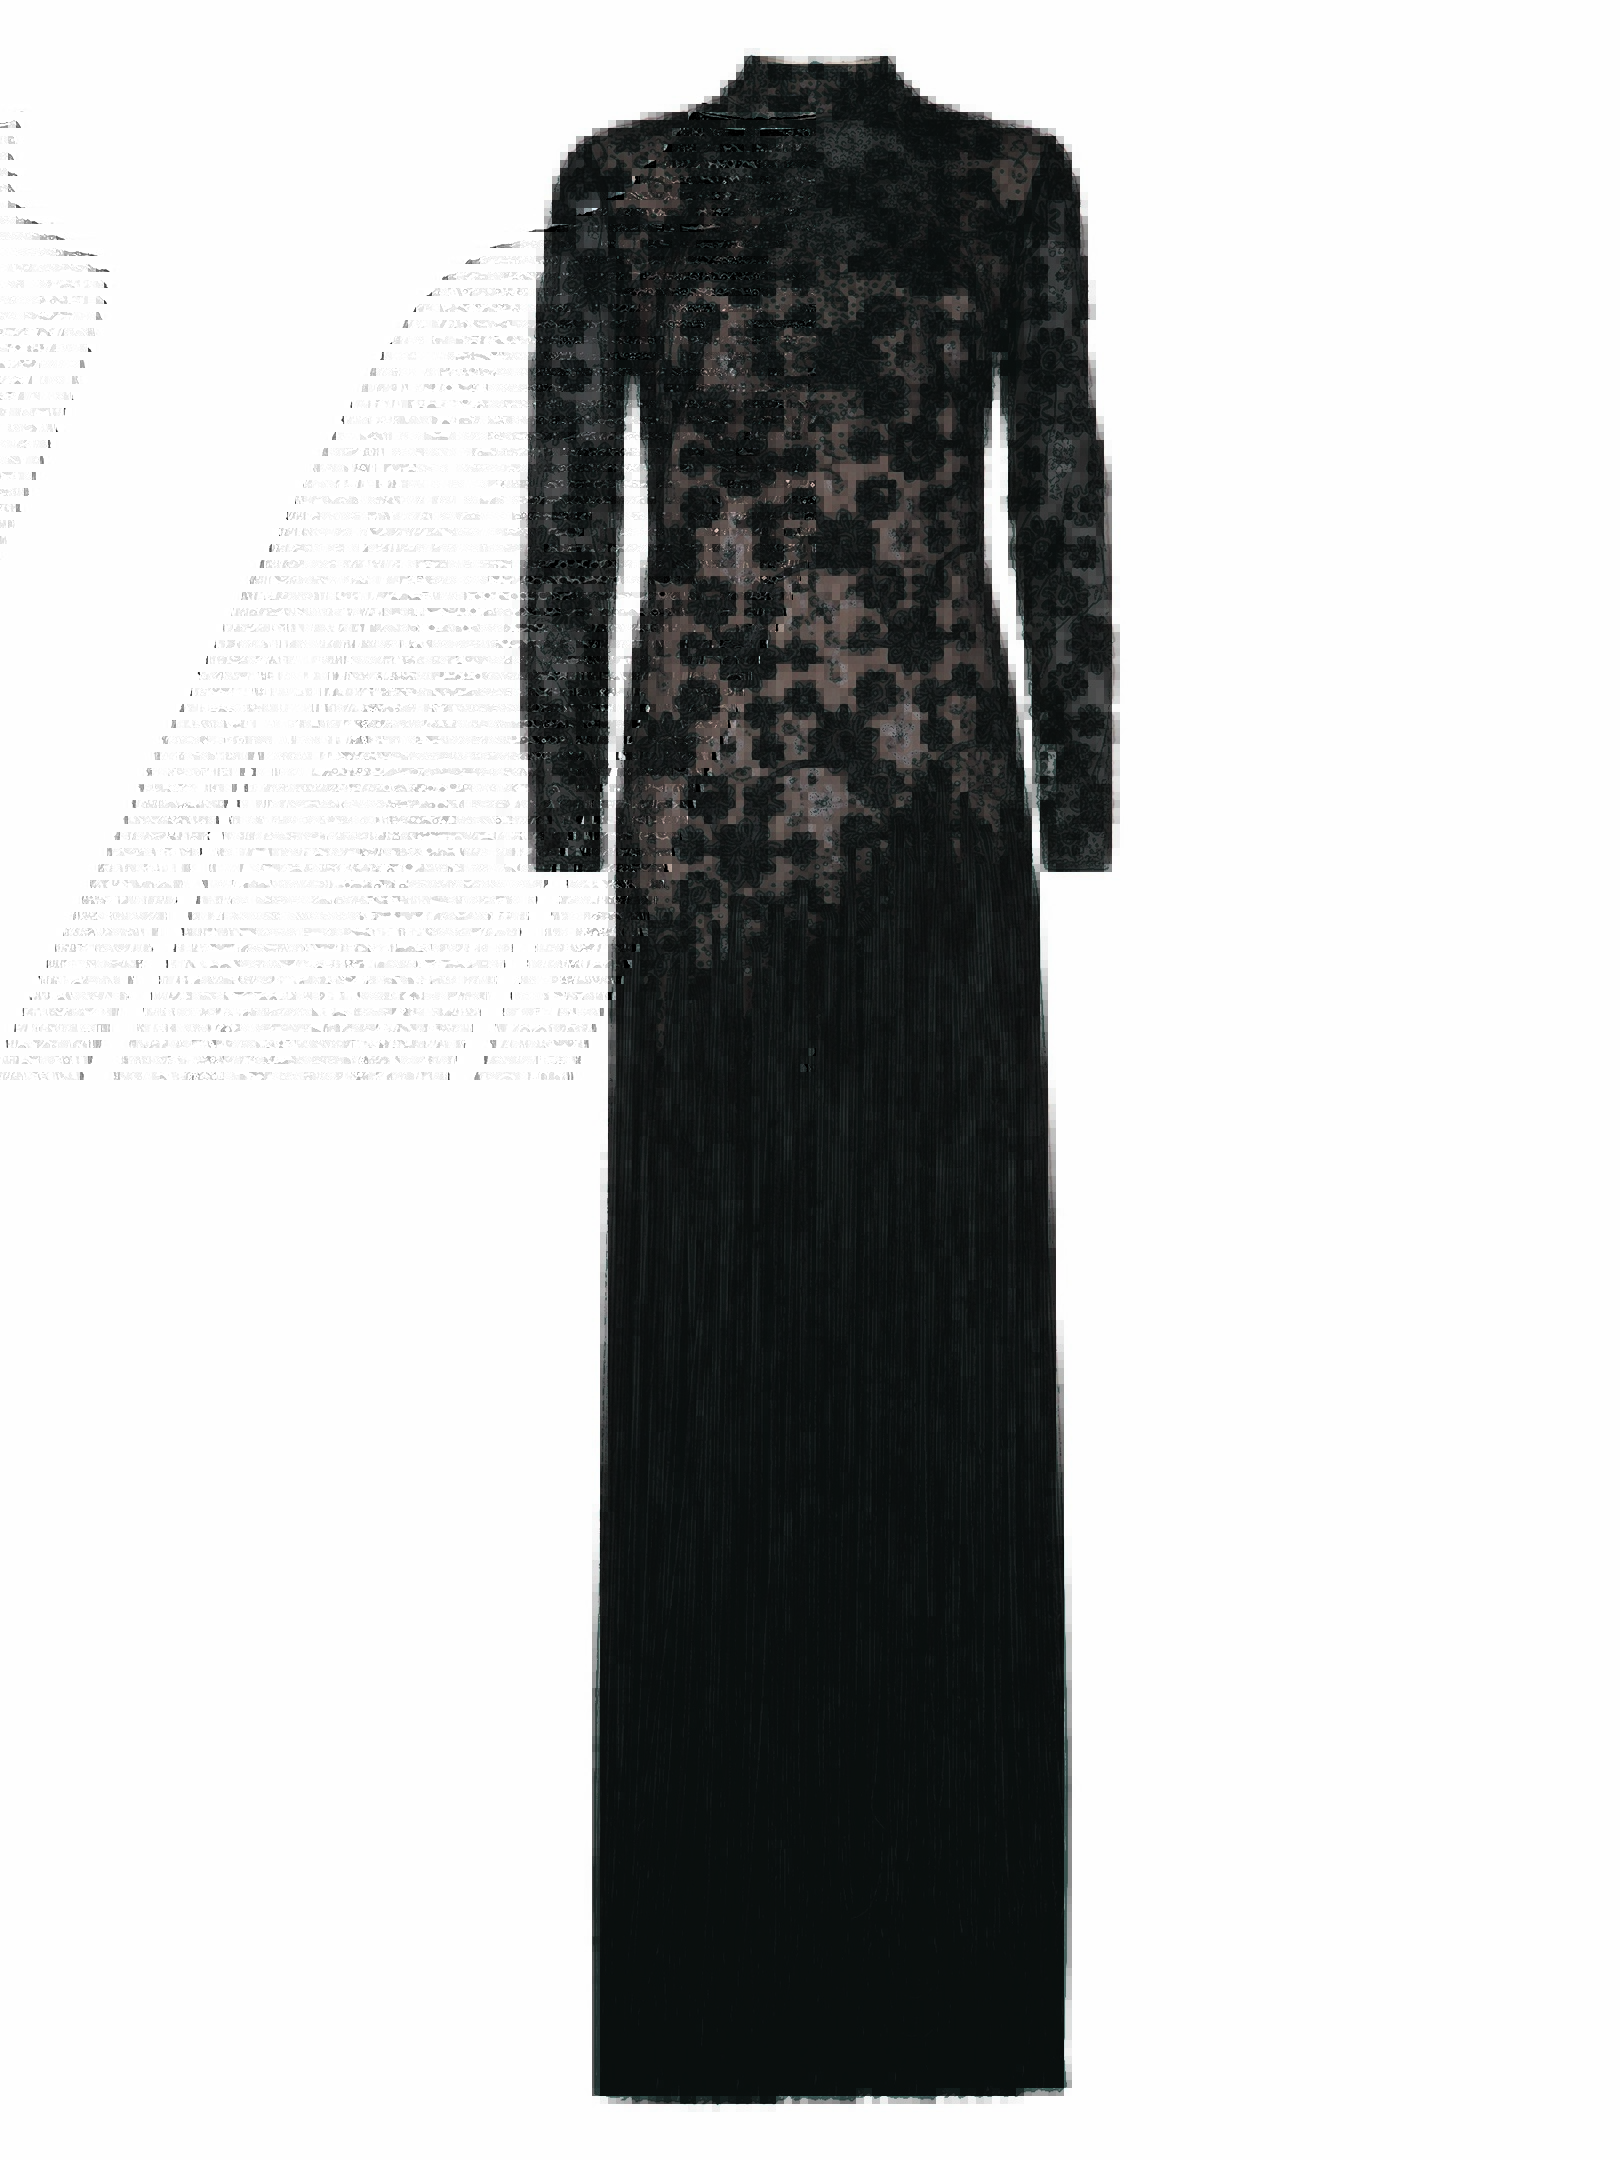 Lorcan Mullany for Jacques Vert fringed dress, £499, 